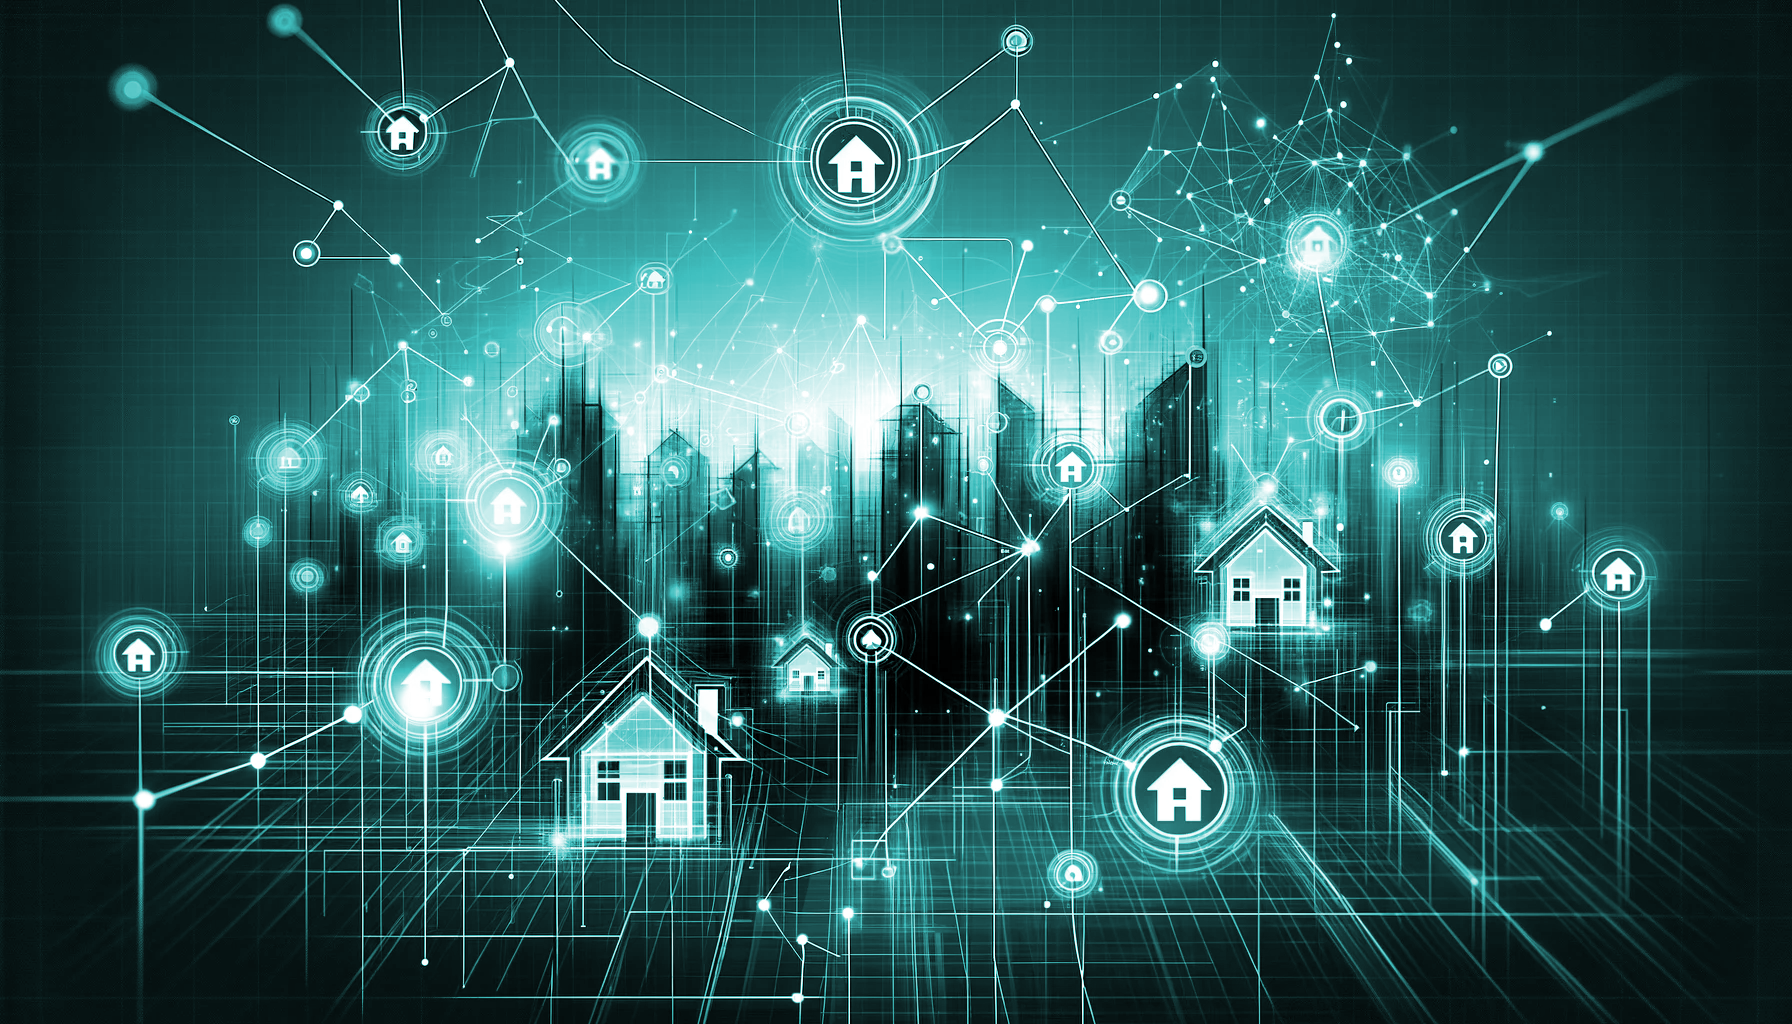 Digital graphic of a network of connected home icons over a cityscape, symbolizing a smart real estate network on a glowing teal background.